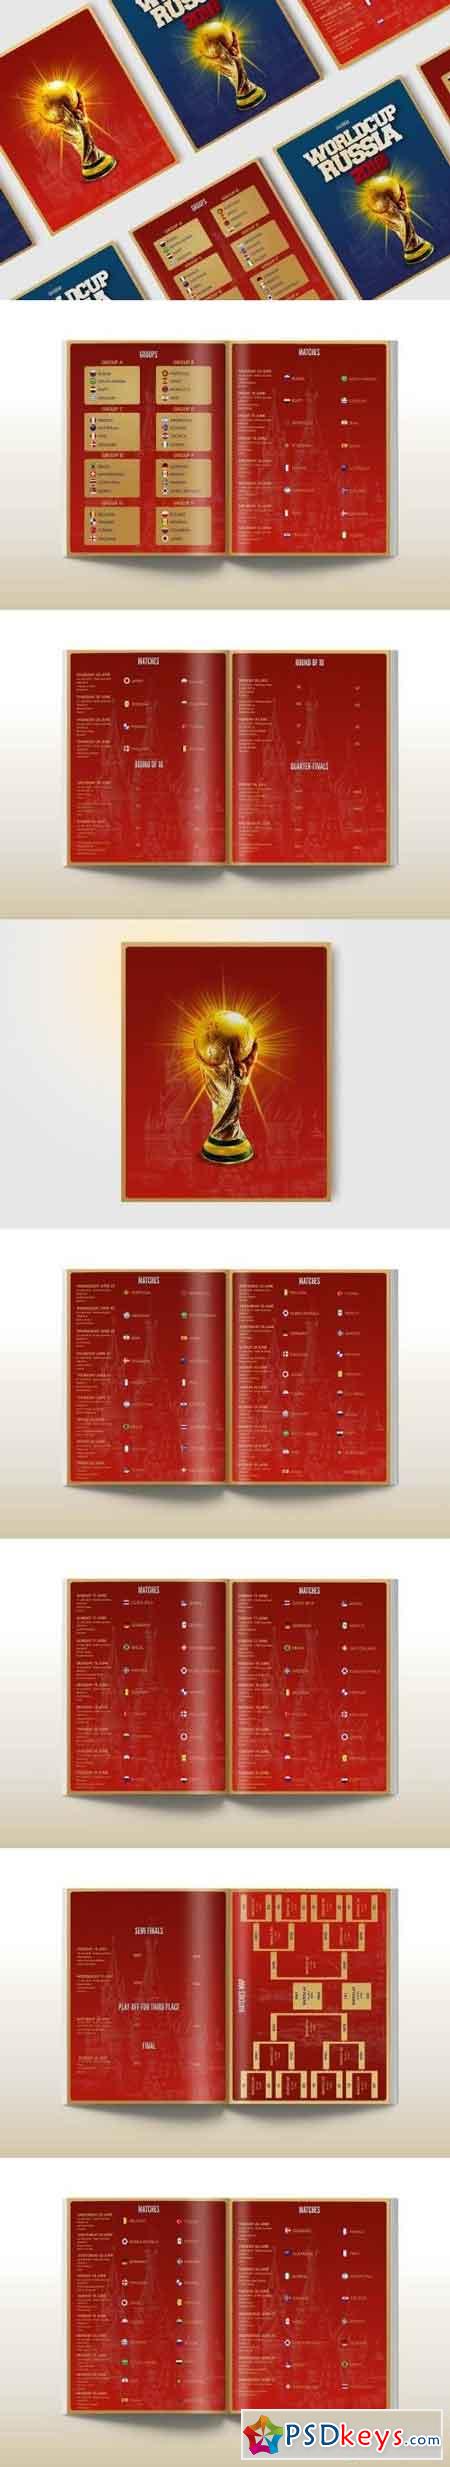 World Cup 2018 Calendar Free Download Photoshop Vector Stock image